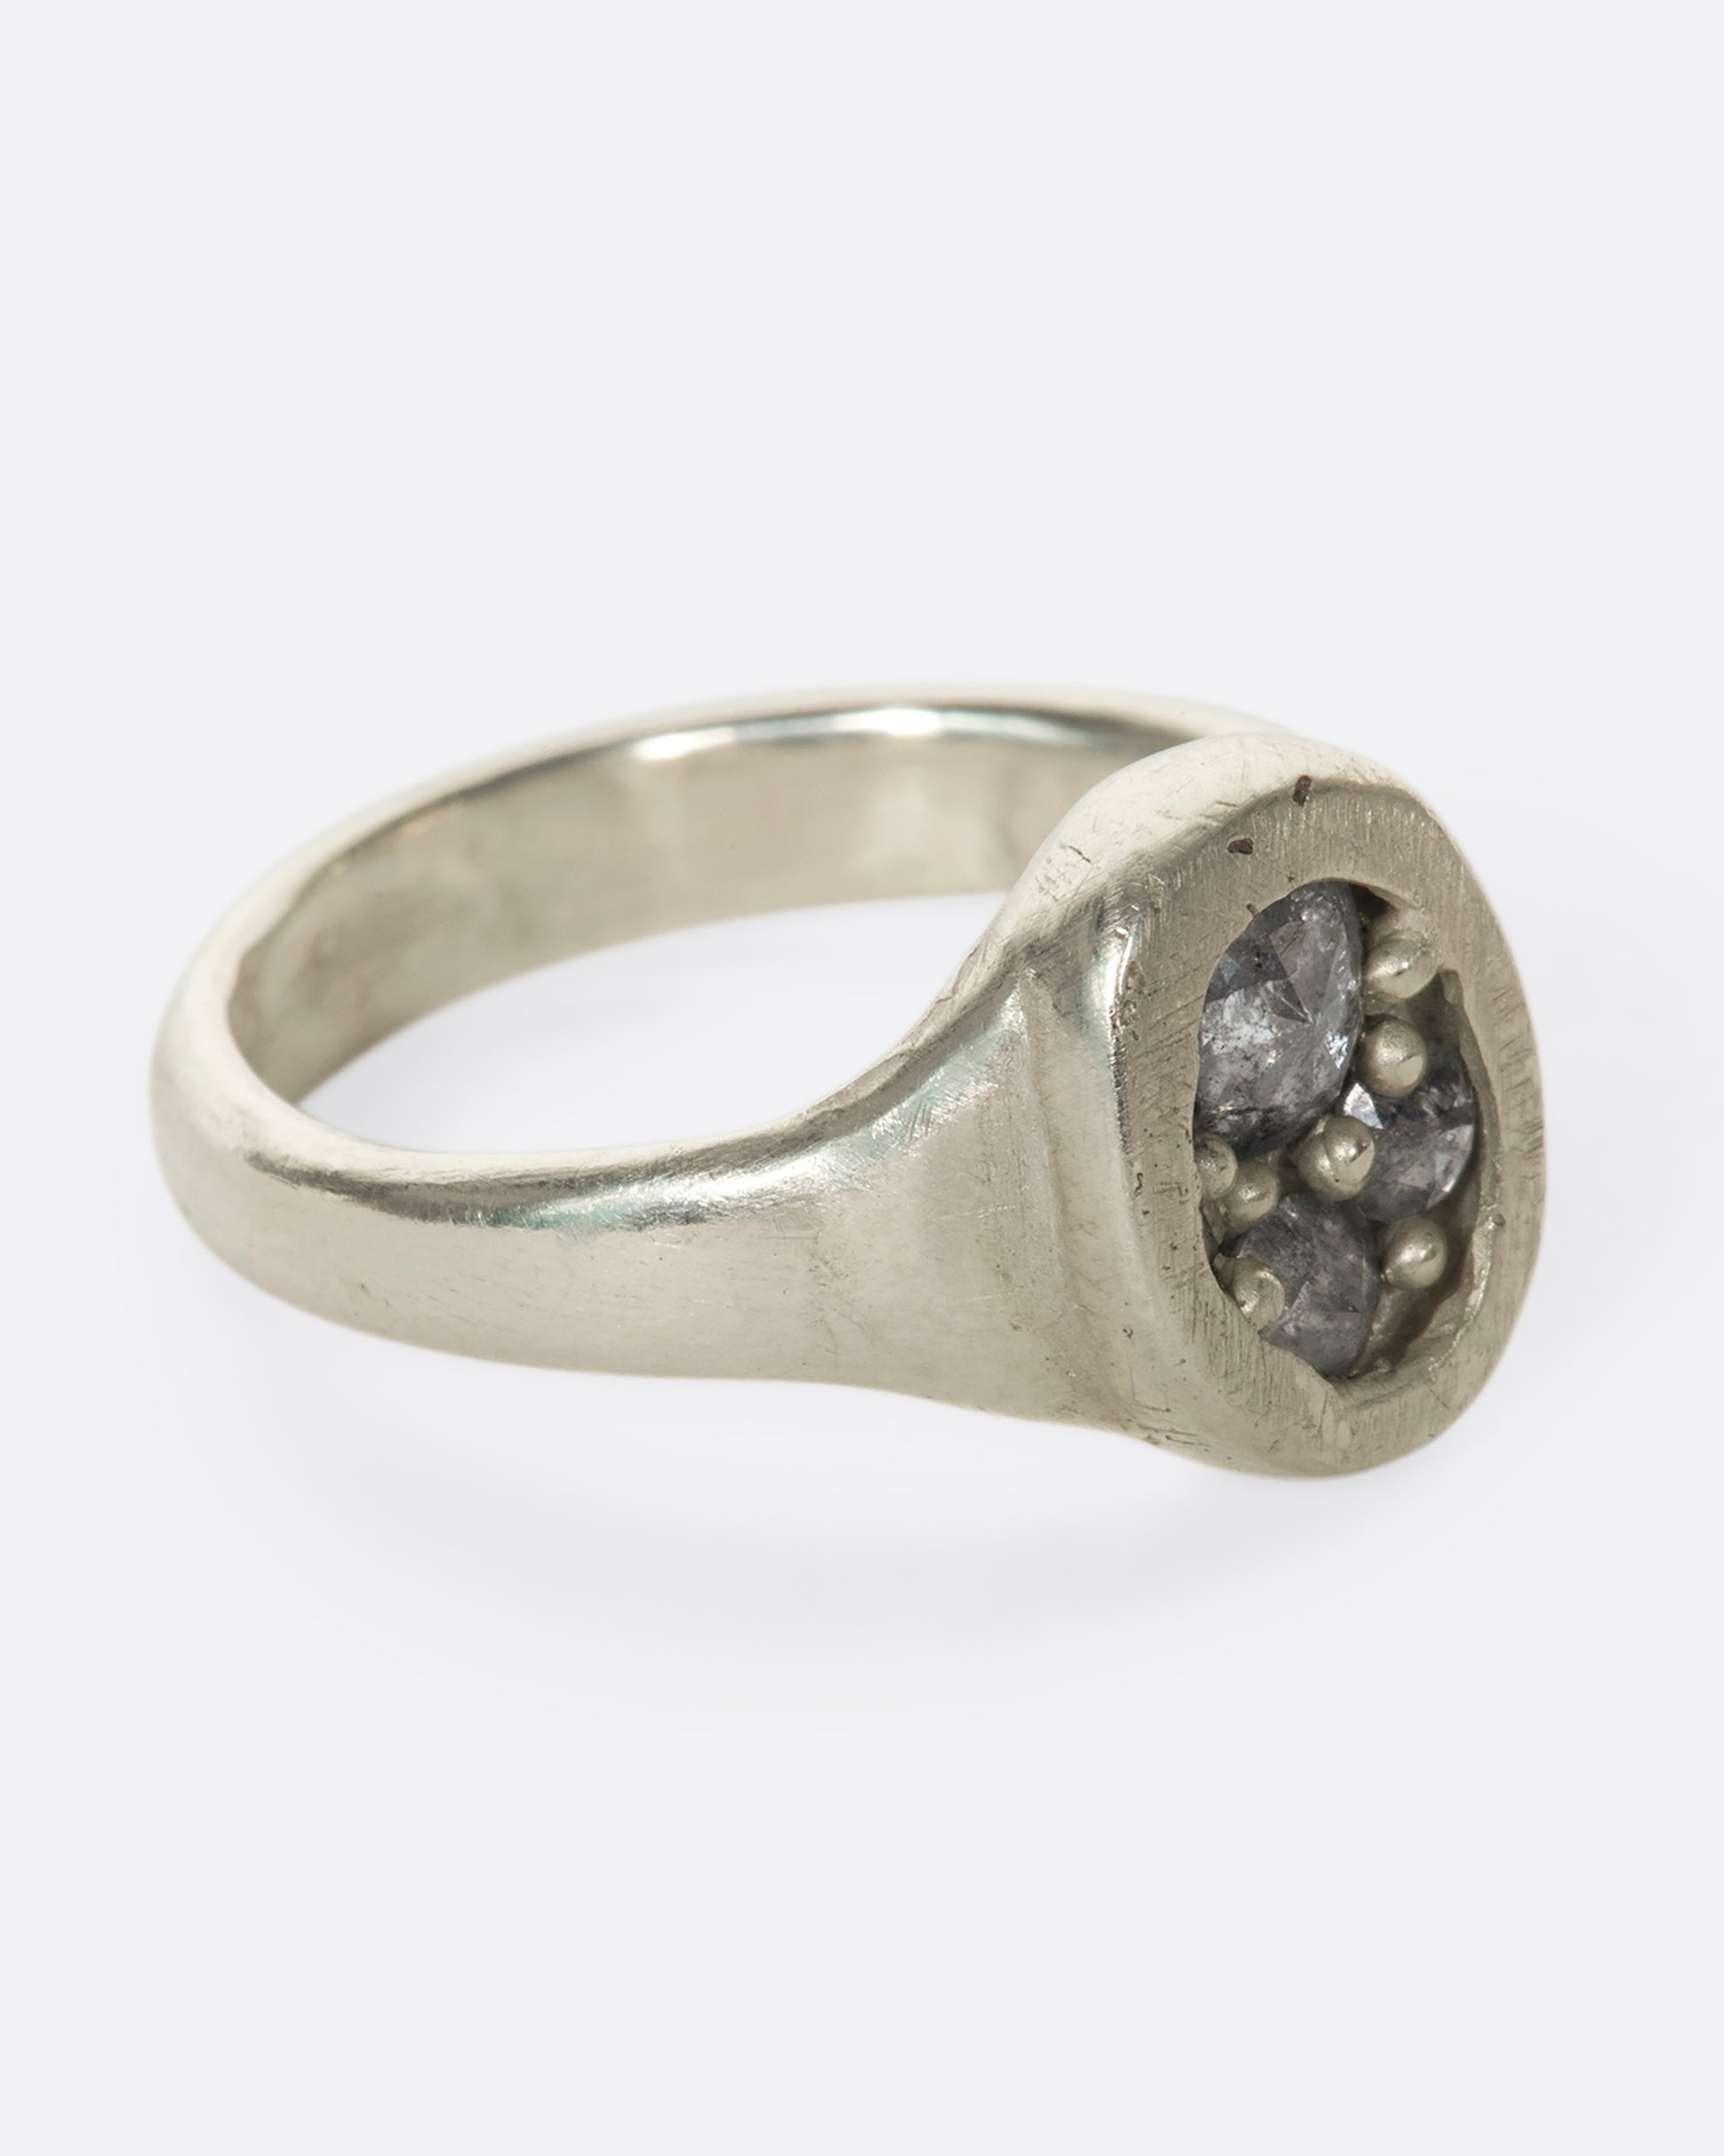 A right side view of an oval silver ring with grey diamonds.